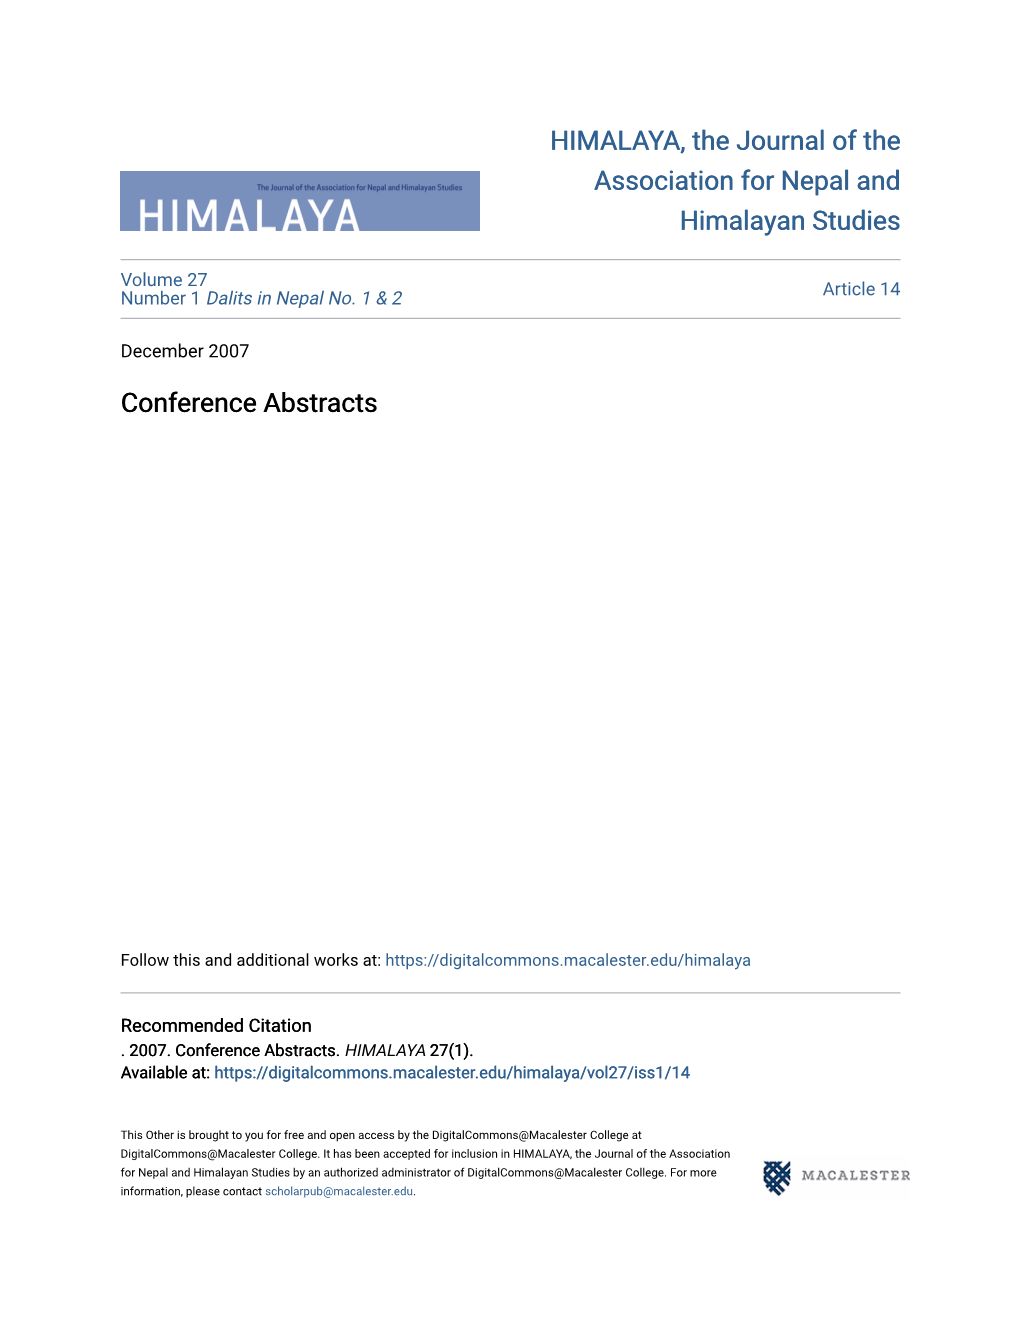 Conference Abstracts